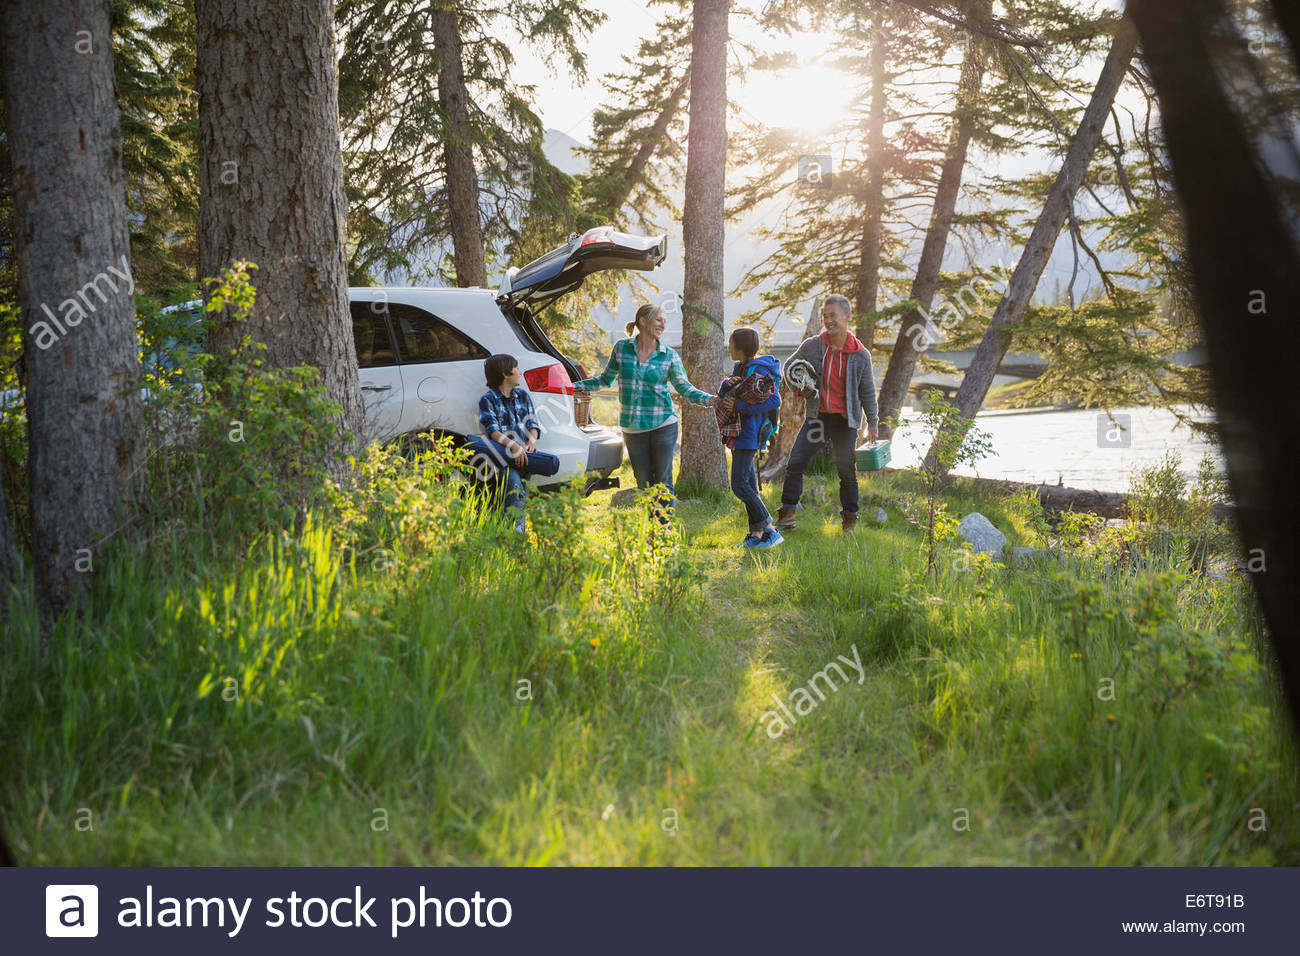 Family unpacking car at campsite Stock Photo